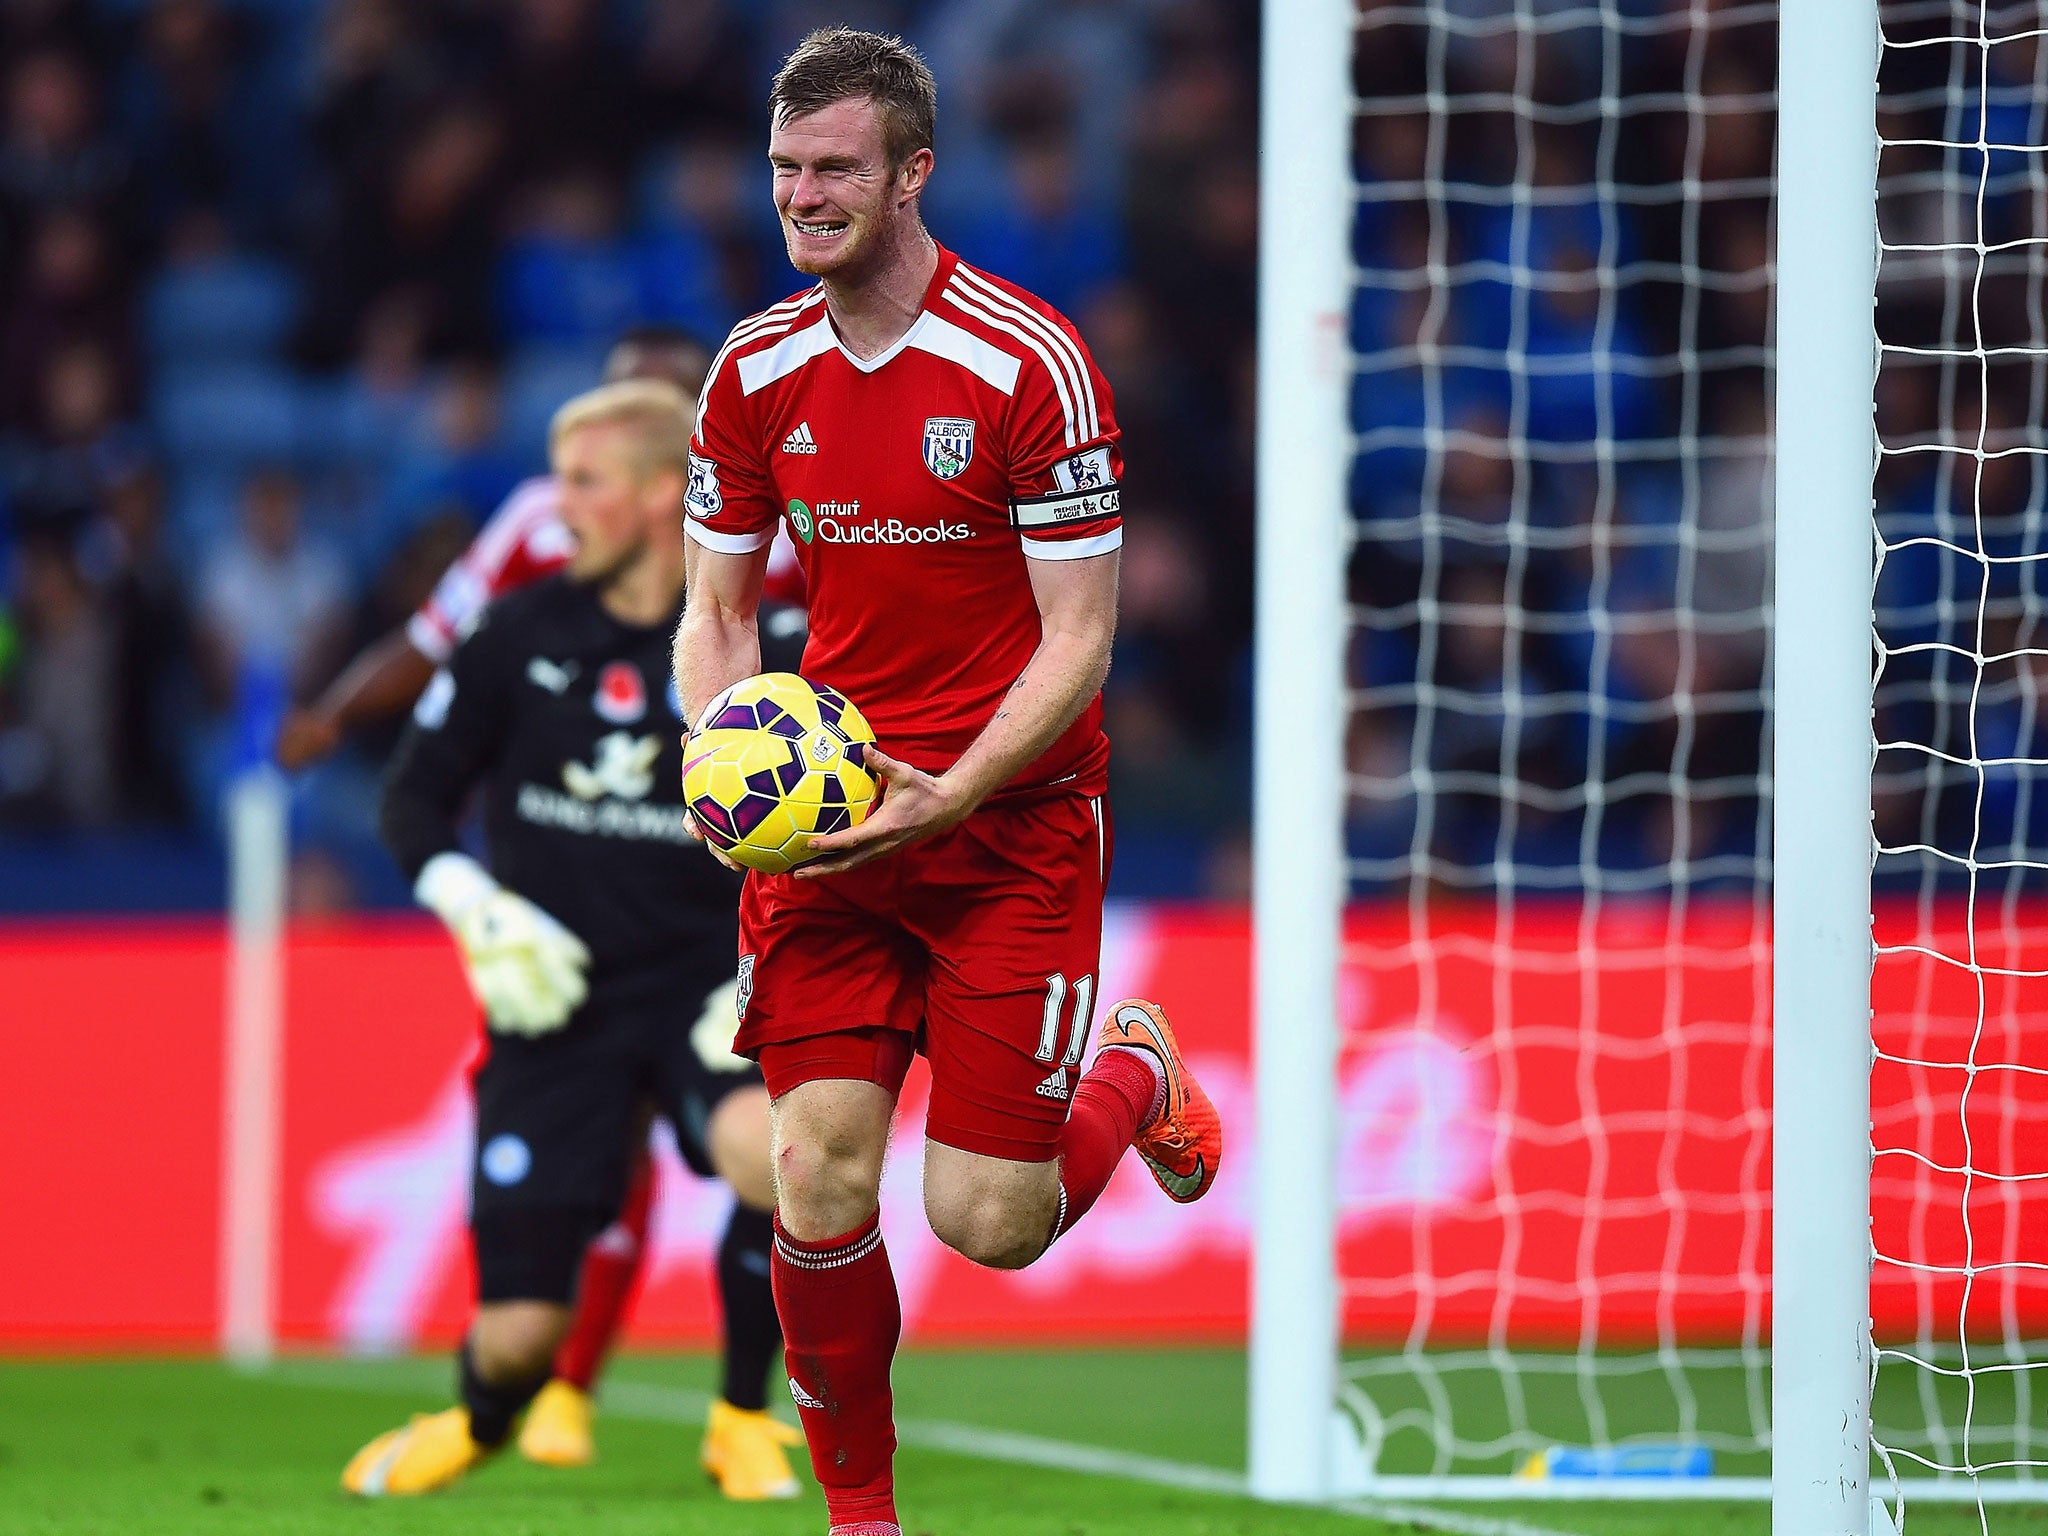 Chris Brunt celebrates after Esteban Cambiasso's own-goal gives West Brom the lead